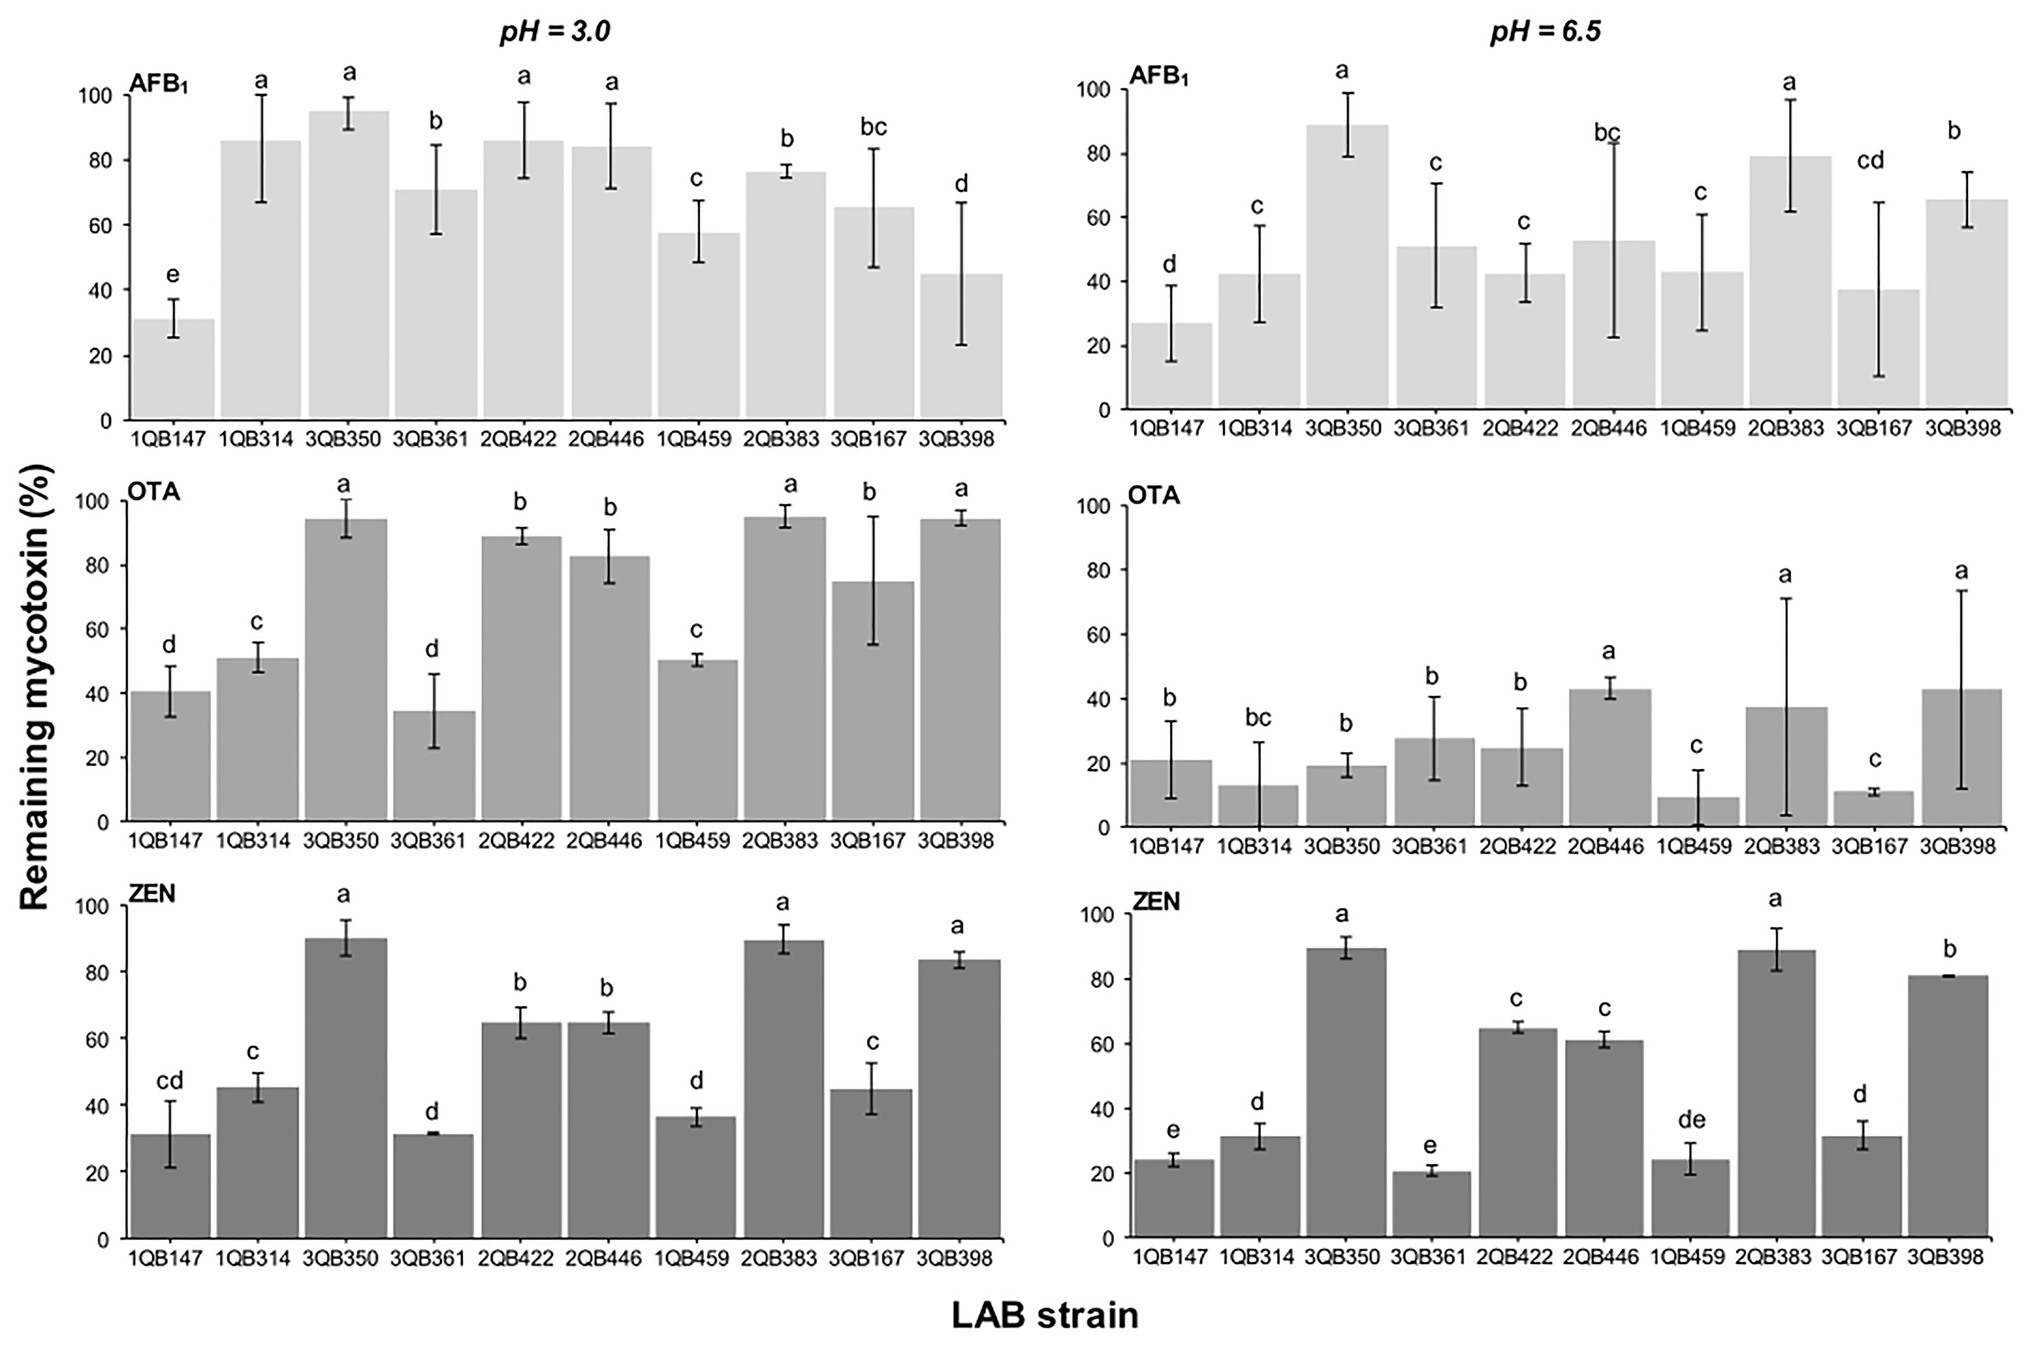 Frontiers Effect Of Lactic Acid Bacteria Strains On The Growth And Aflatoxin Production Potential Of Aspergillus Parasiticus And Their Ability To Bind Aflatoxin B1 Ochratoxin A And Zearalenone In Vitro Microbiology